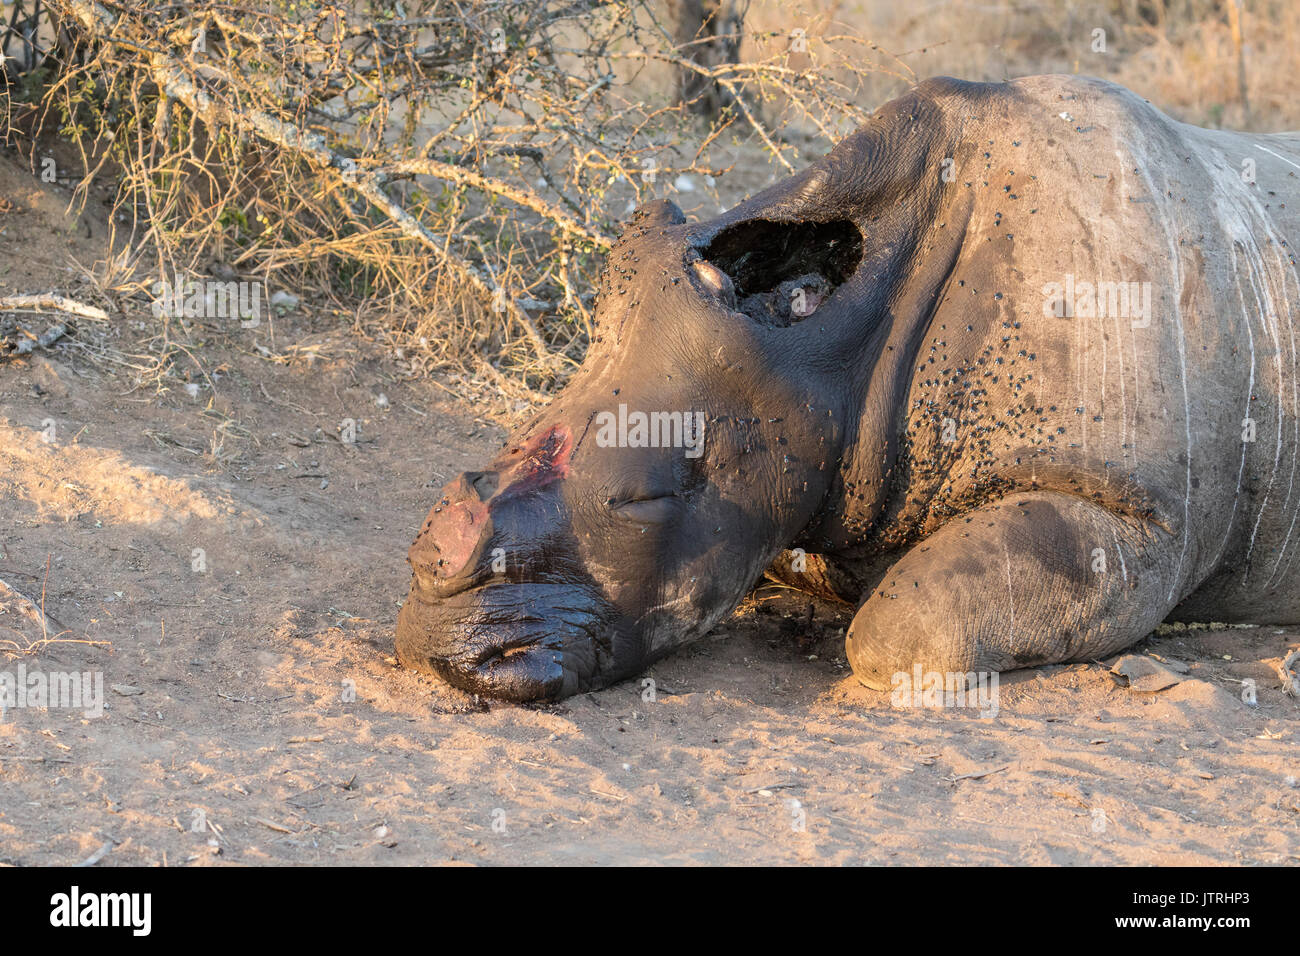 A white rhinoceros, killed for the supposed medicinal value of its horn, lies rotting in a South African game reserve. Stock Photo